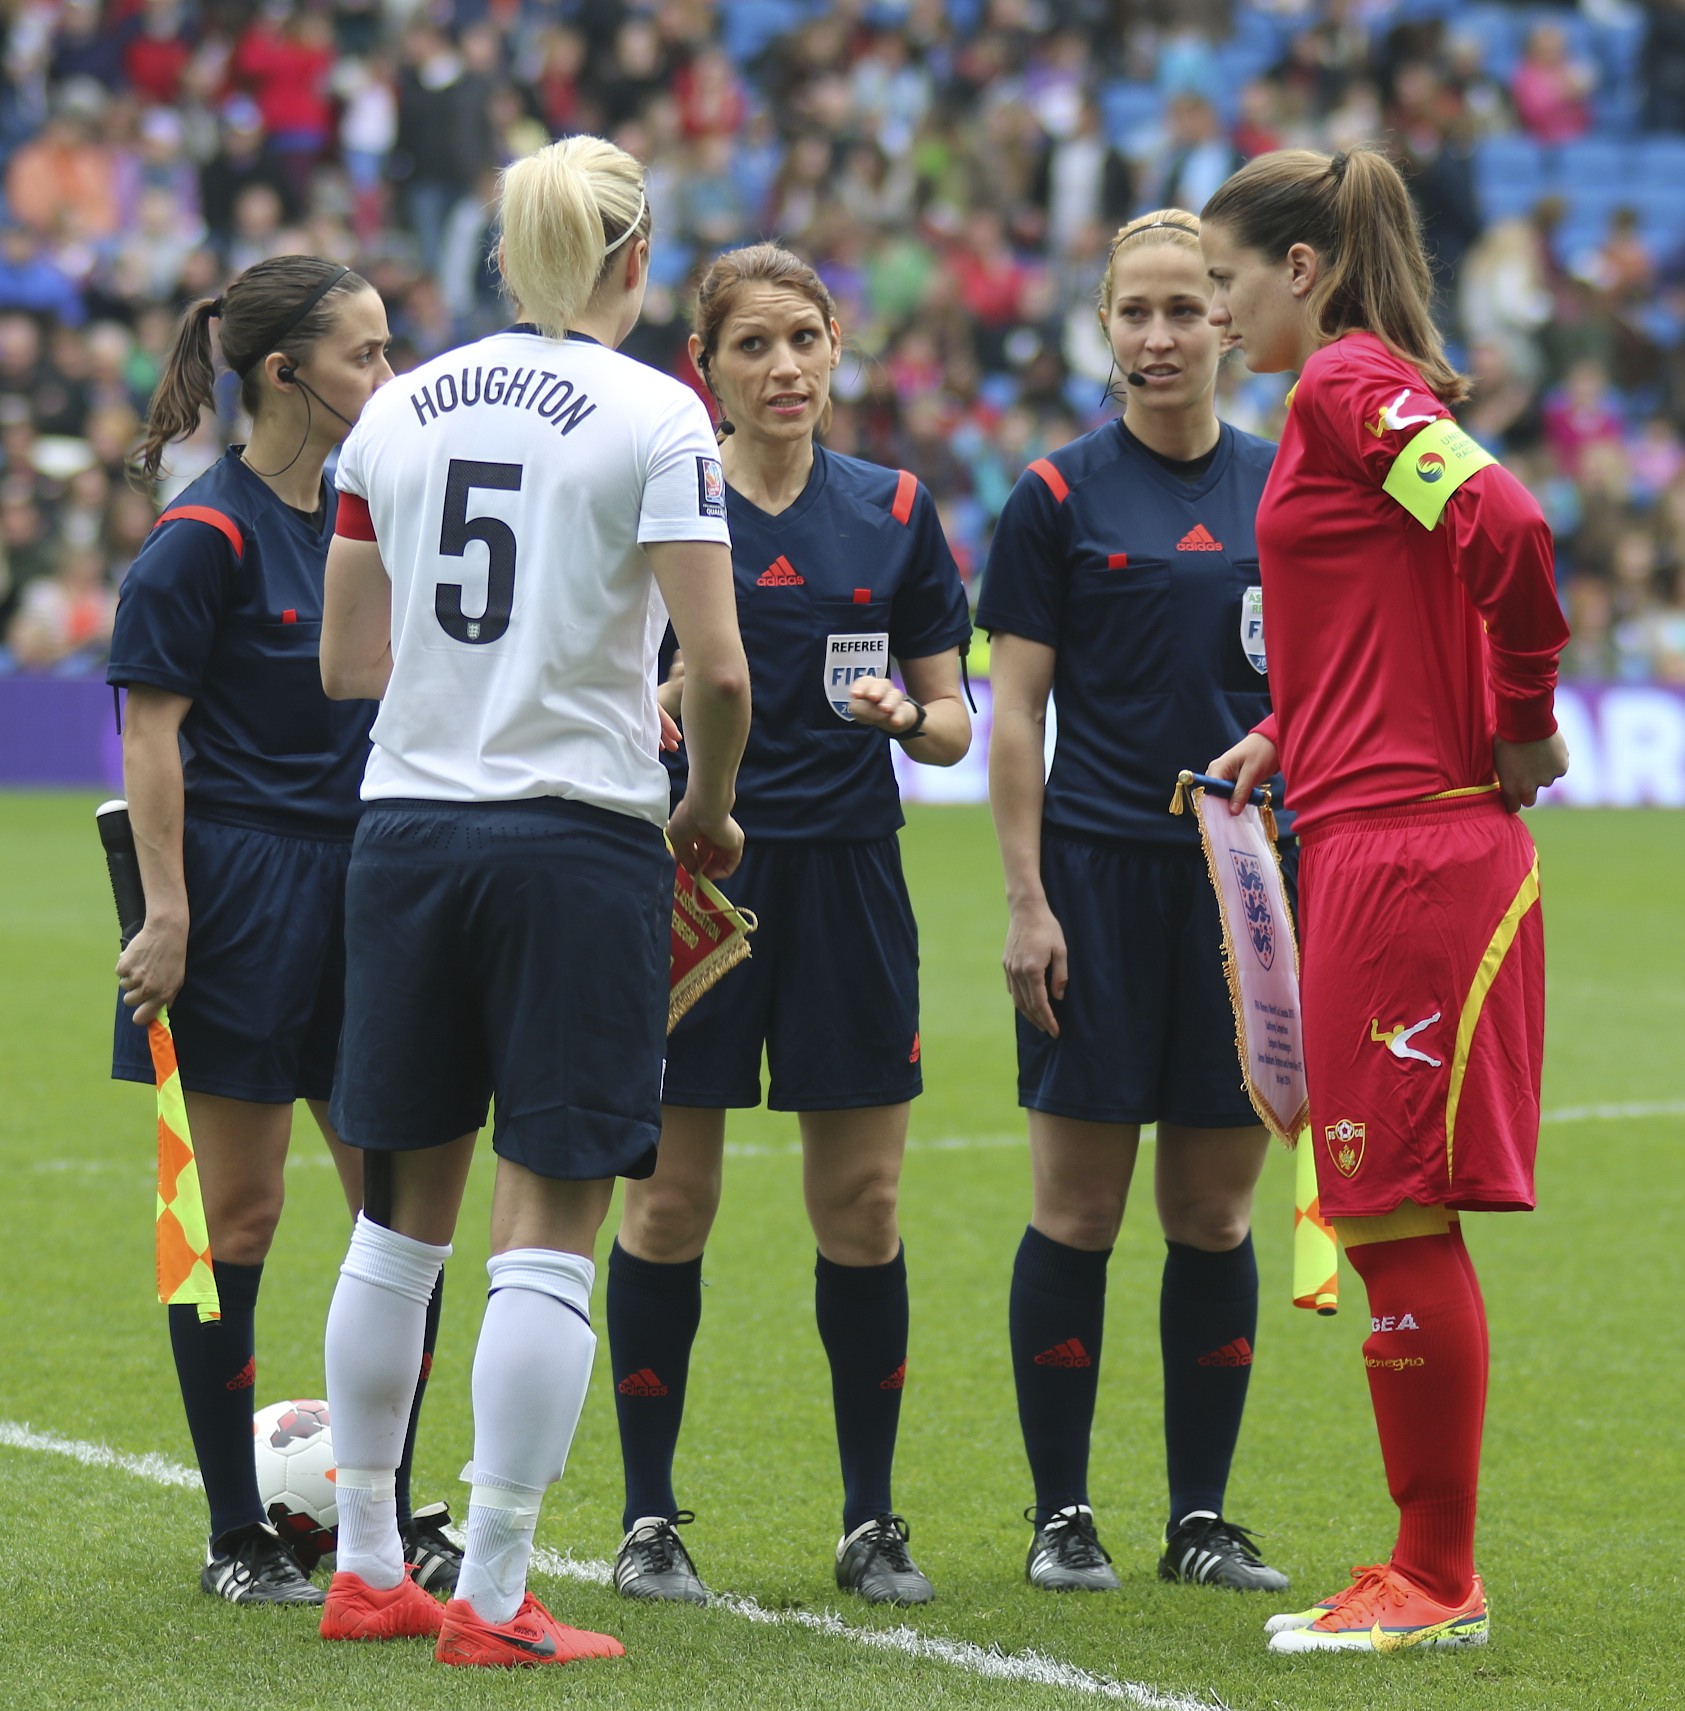 File:Choice of Ends England Ladies v Montenegro 5 4 2014 153.jpg - Wikimedia Commons